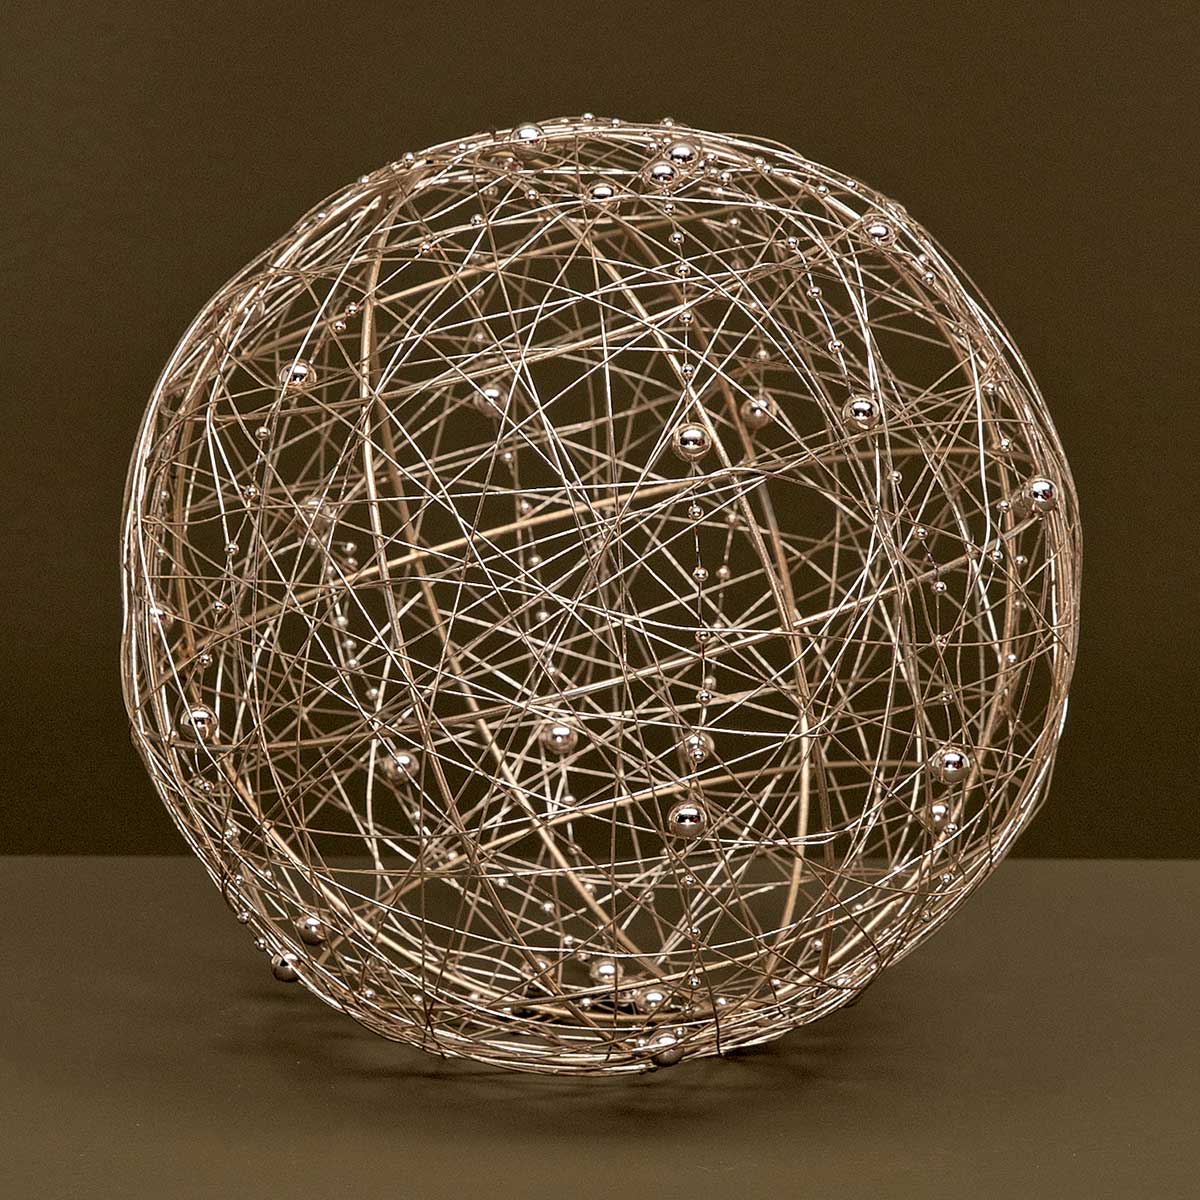 DECORATIVE WIRE BALL CHAMPAGNE WITH BEADS LARGE 7.5"